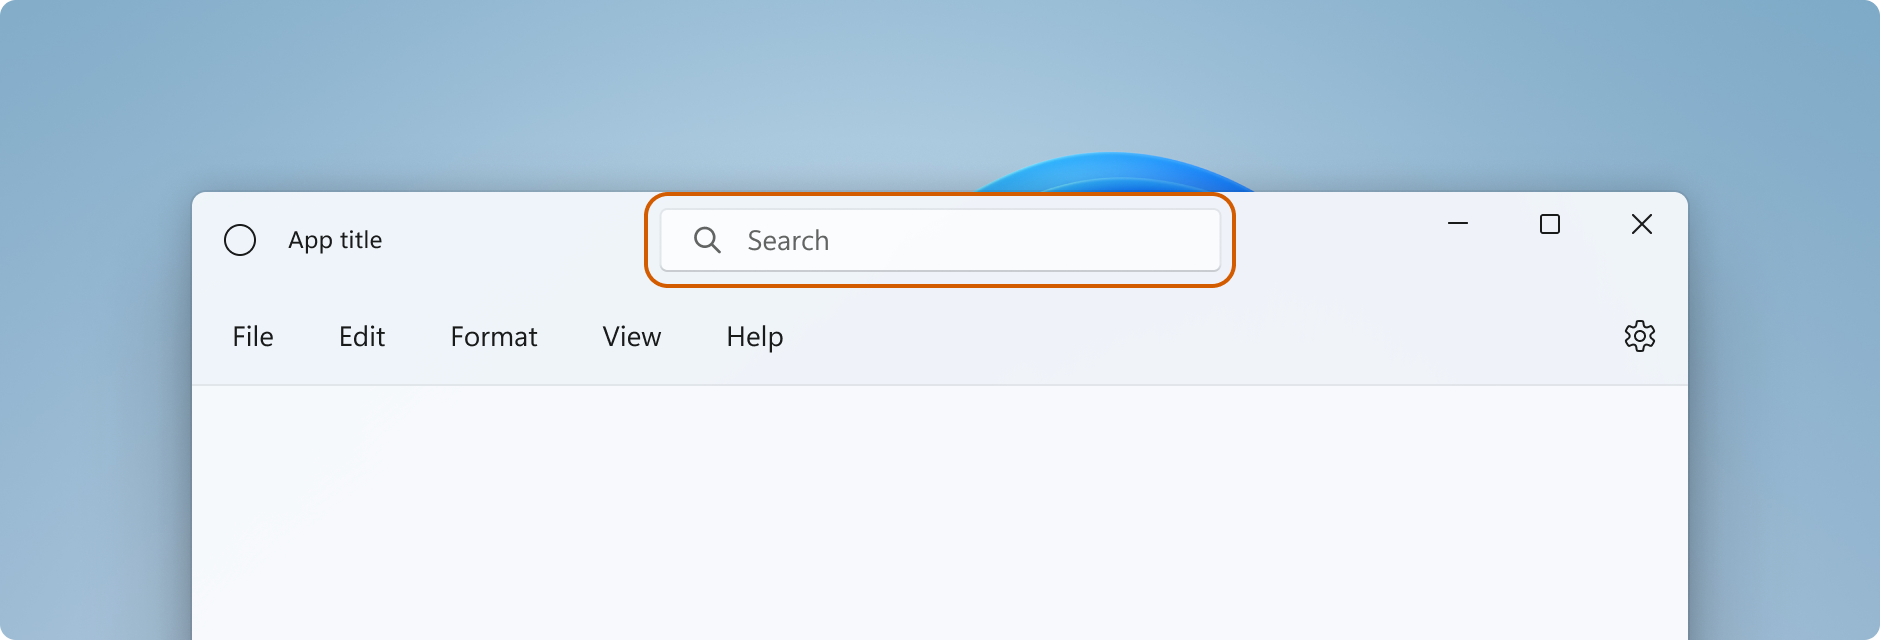 A Windows app with a search box in the title bar